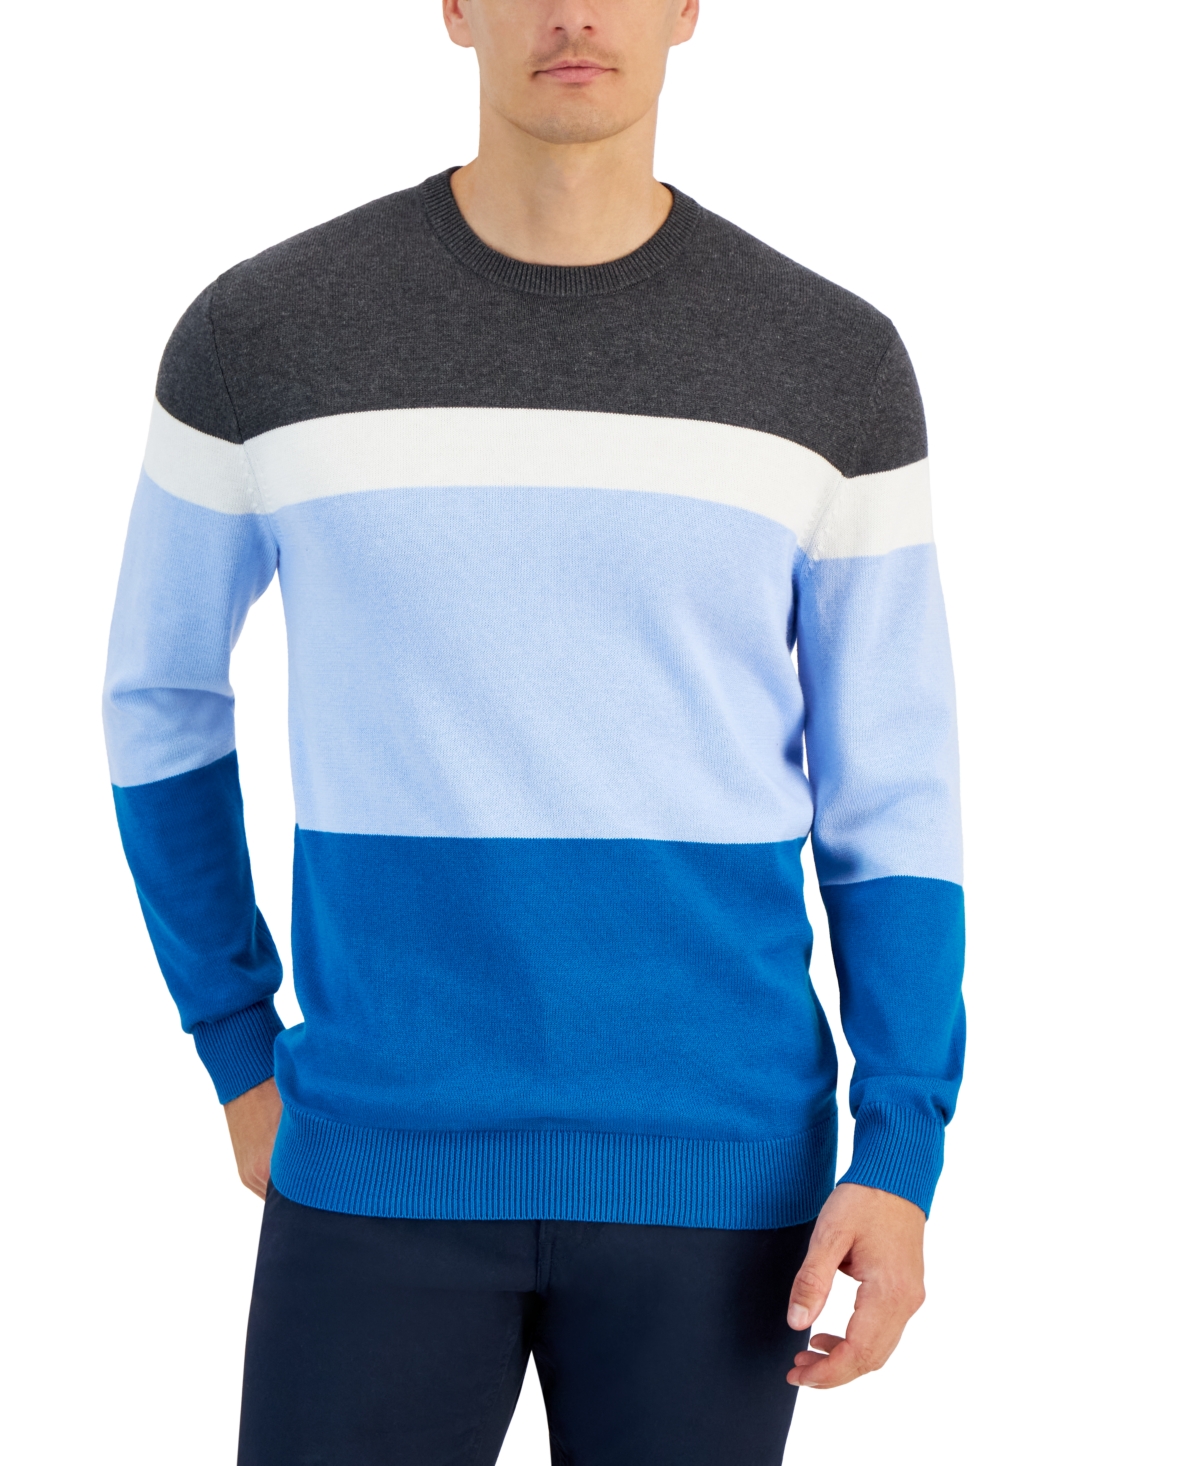 Men's Elevated Marled Colorblocked Long Sleeve Crewneck Sweater, Created for Macy's - Nearing Dusk